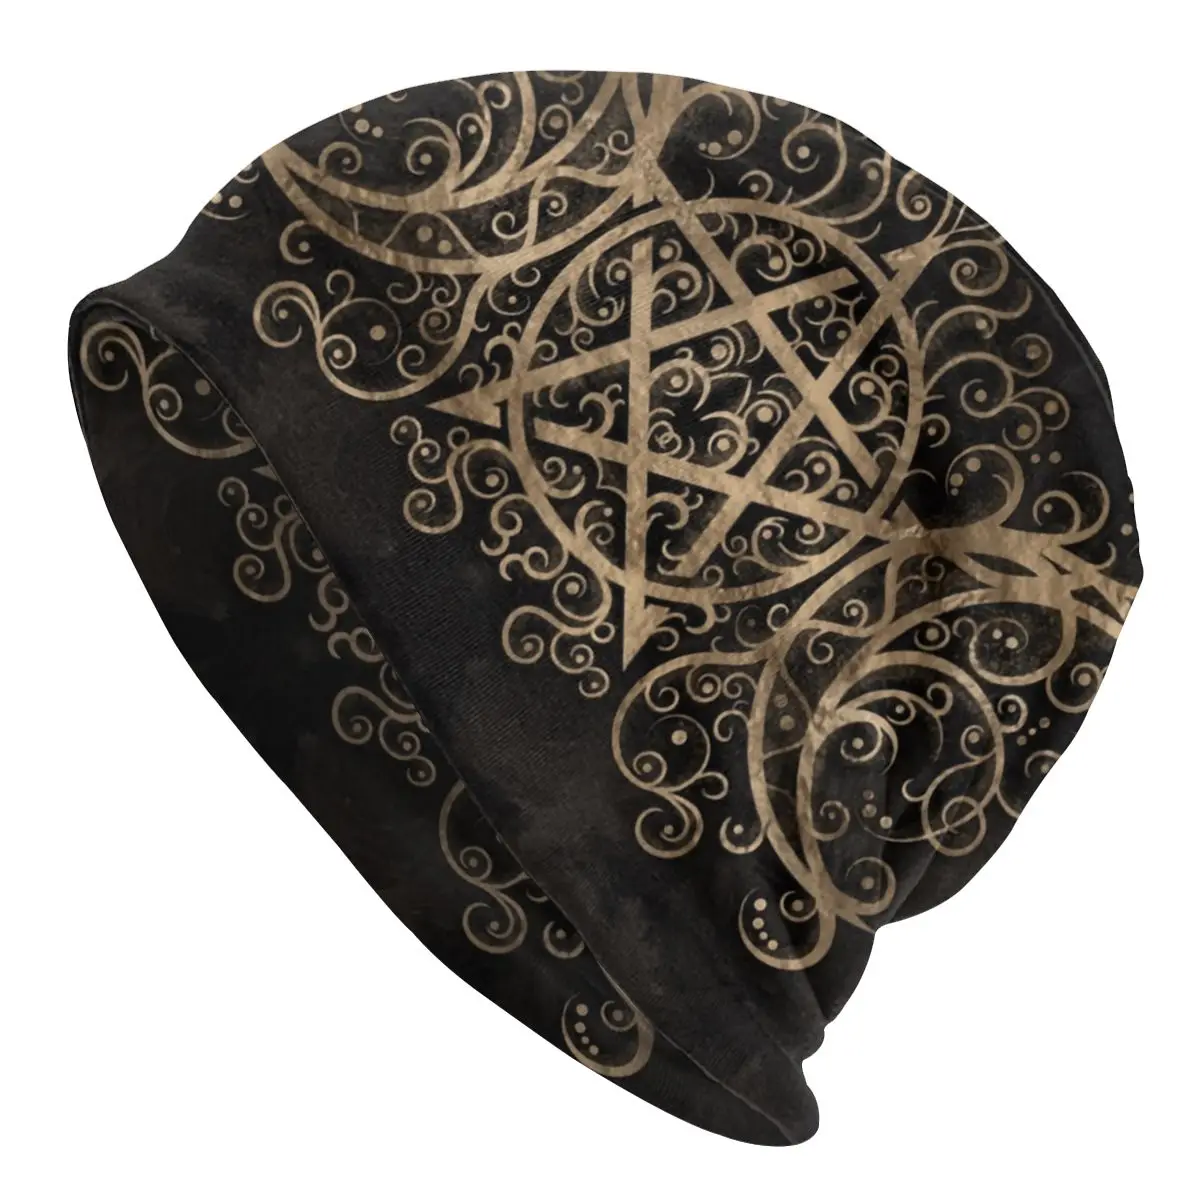 

Triple Moon Goddess Pentagram Beanies Cap Unisex Outdoor Winter Warm Knitting Hat Adult Goth Wiccan Witch Witchcraft Bonnet Hats